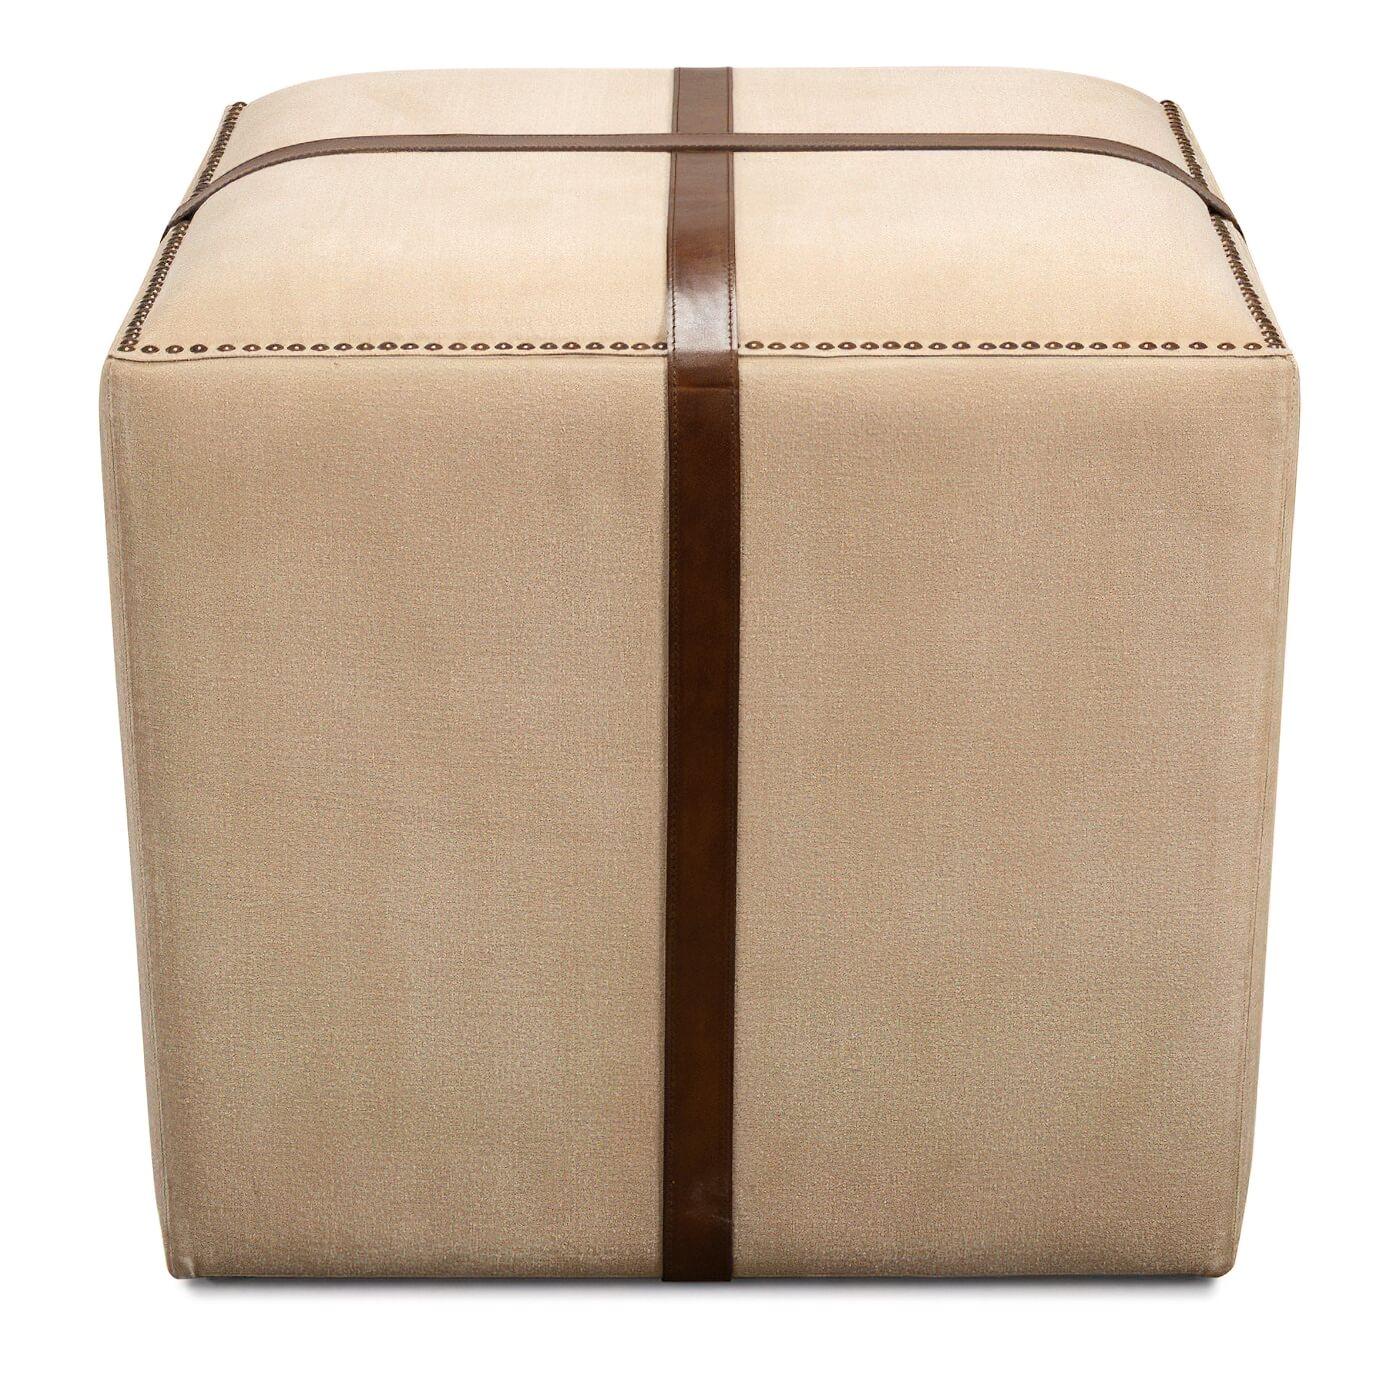 A canvas and leather strap ottoman with nailhead trim accents. The classic cube design makes it a perfect transitional piece of furniture to use as an ottoman or stool. 

Dimensions 
24 in. W x 24 in. D x 20 in. H.
 